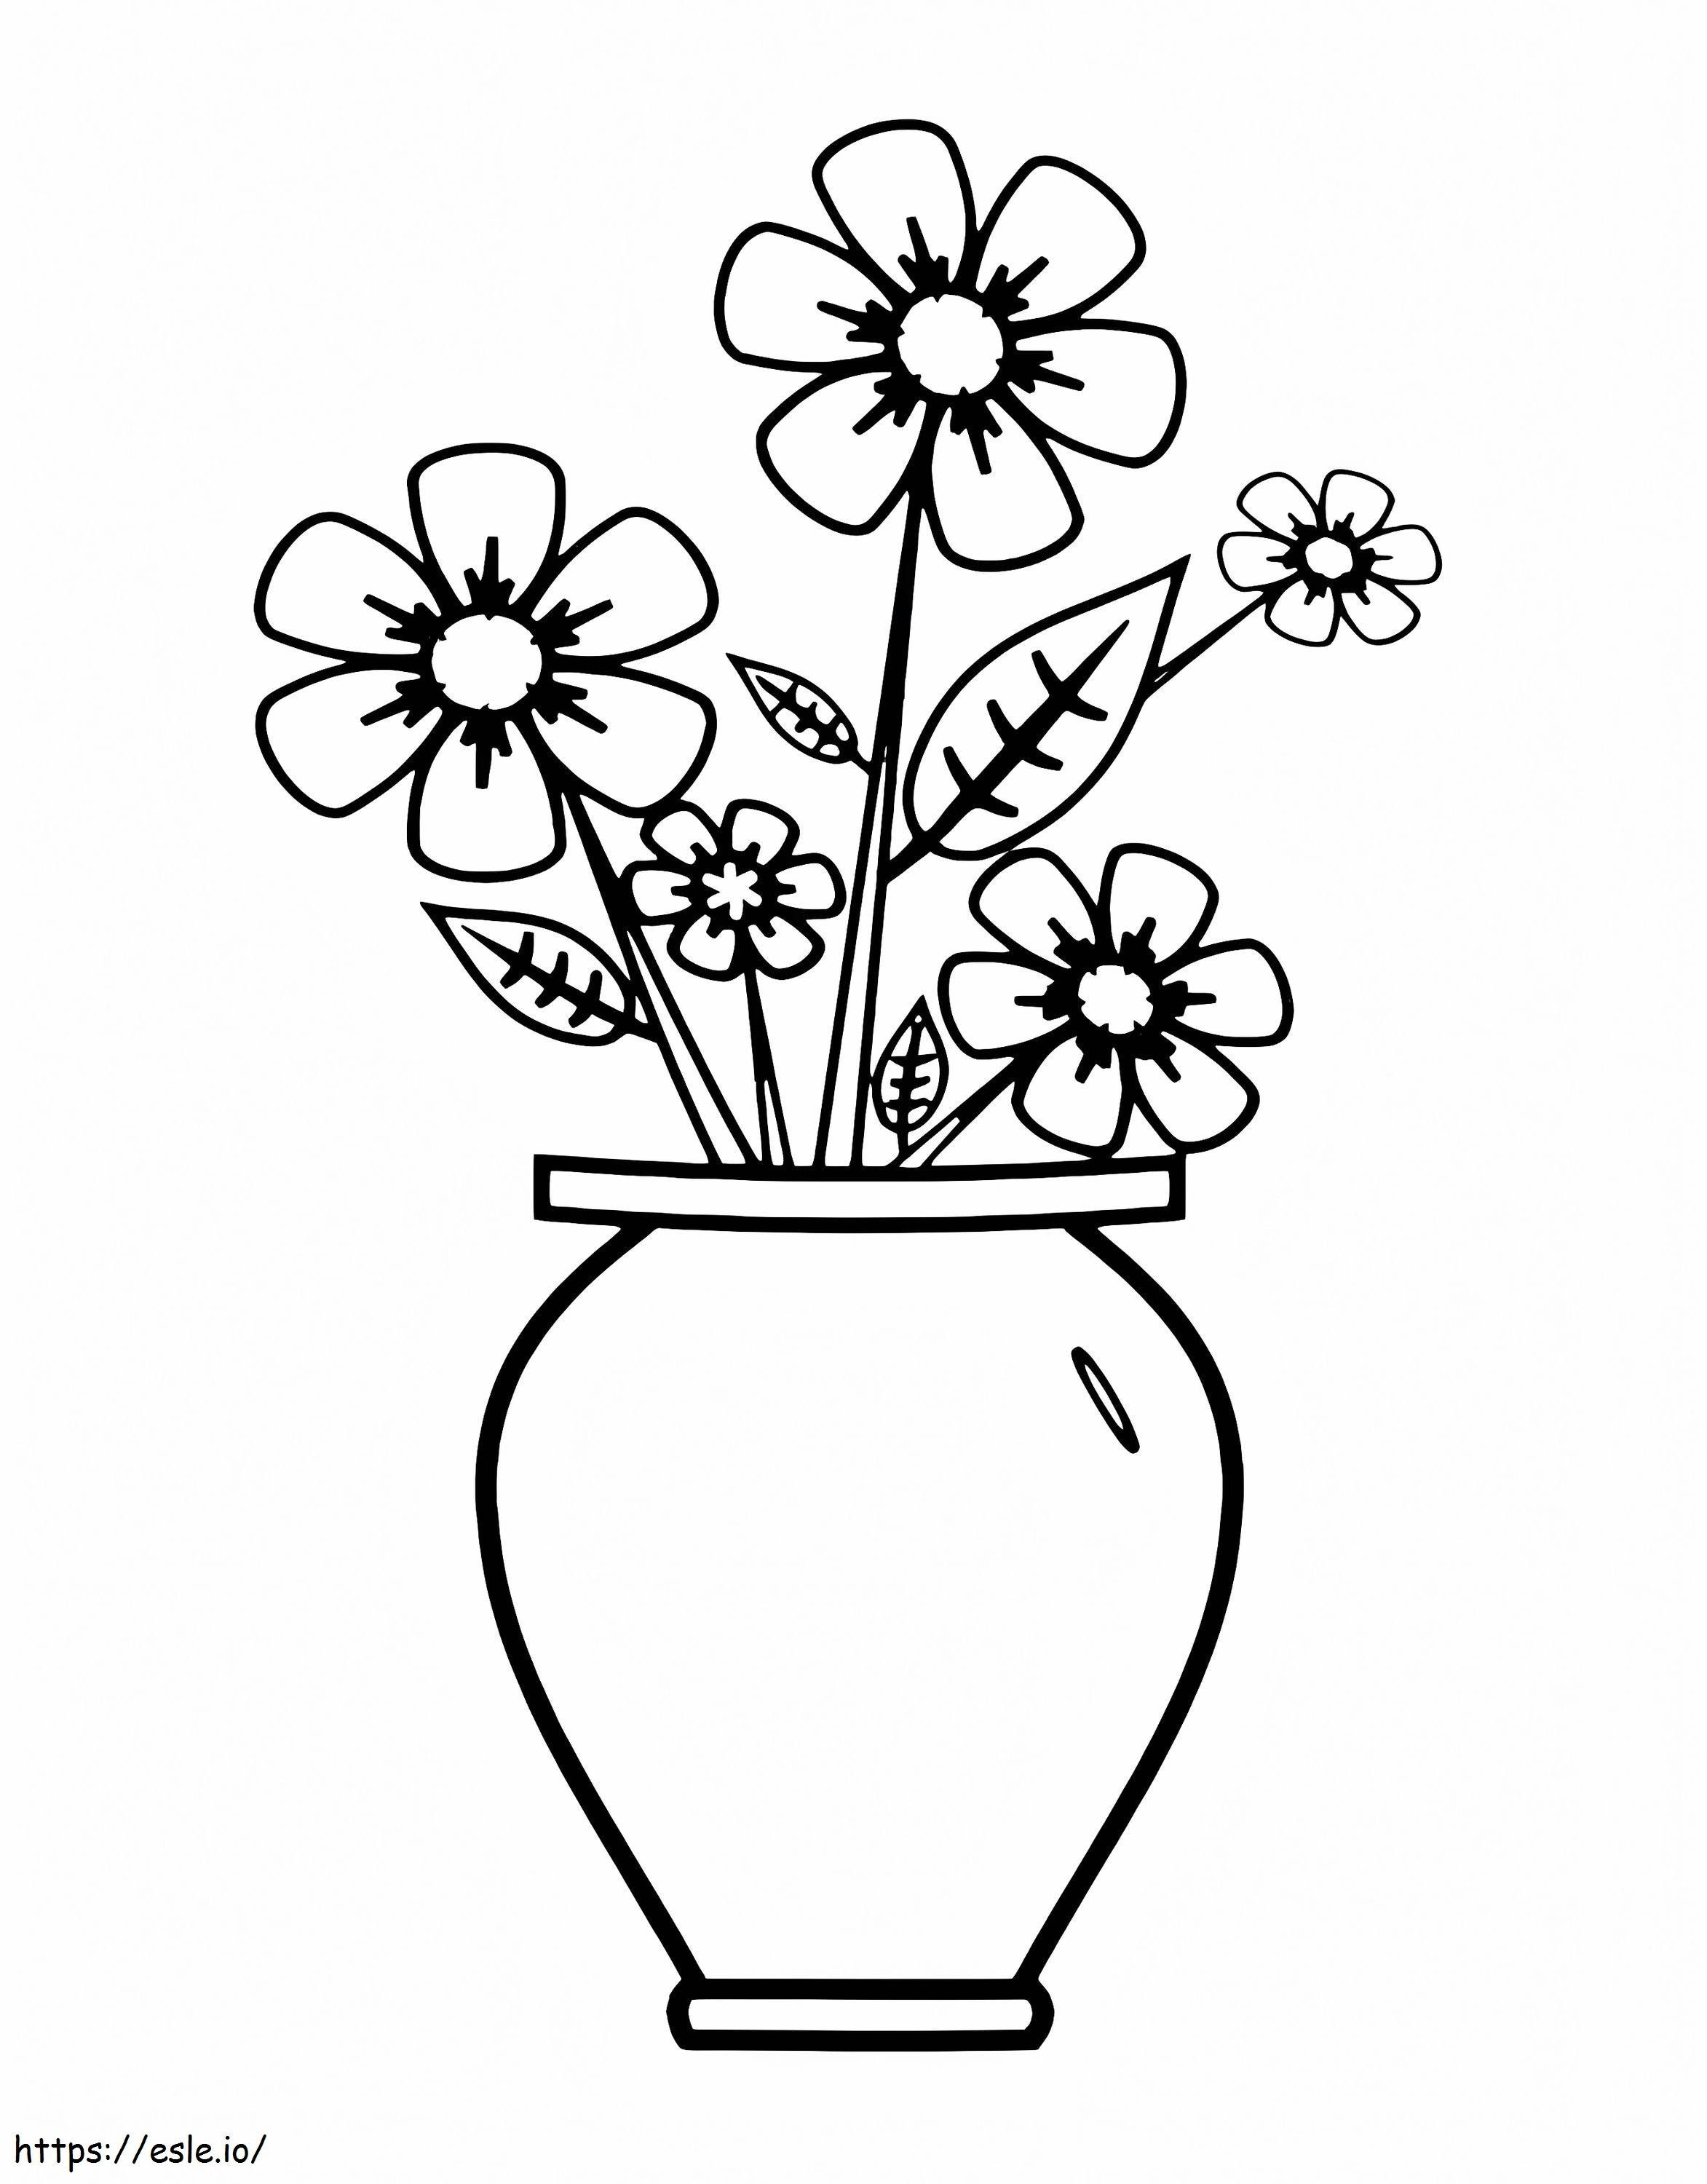 Flower Vase 9 coloring page